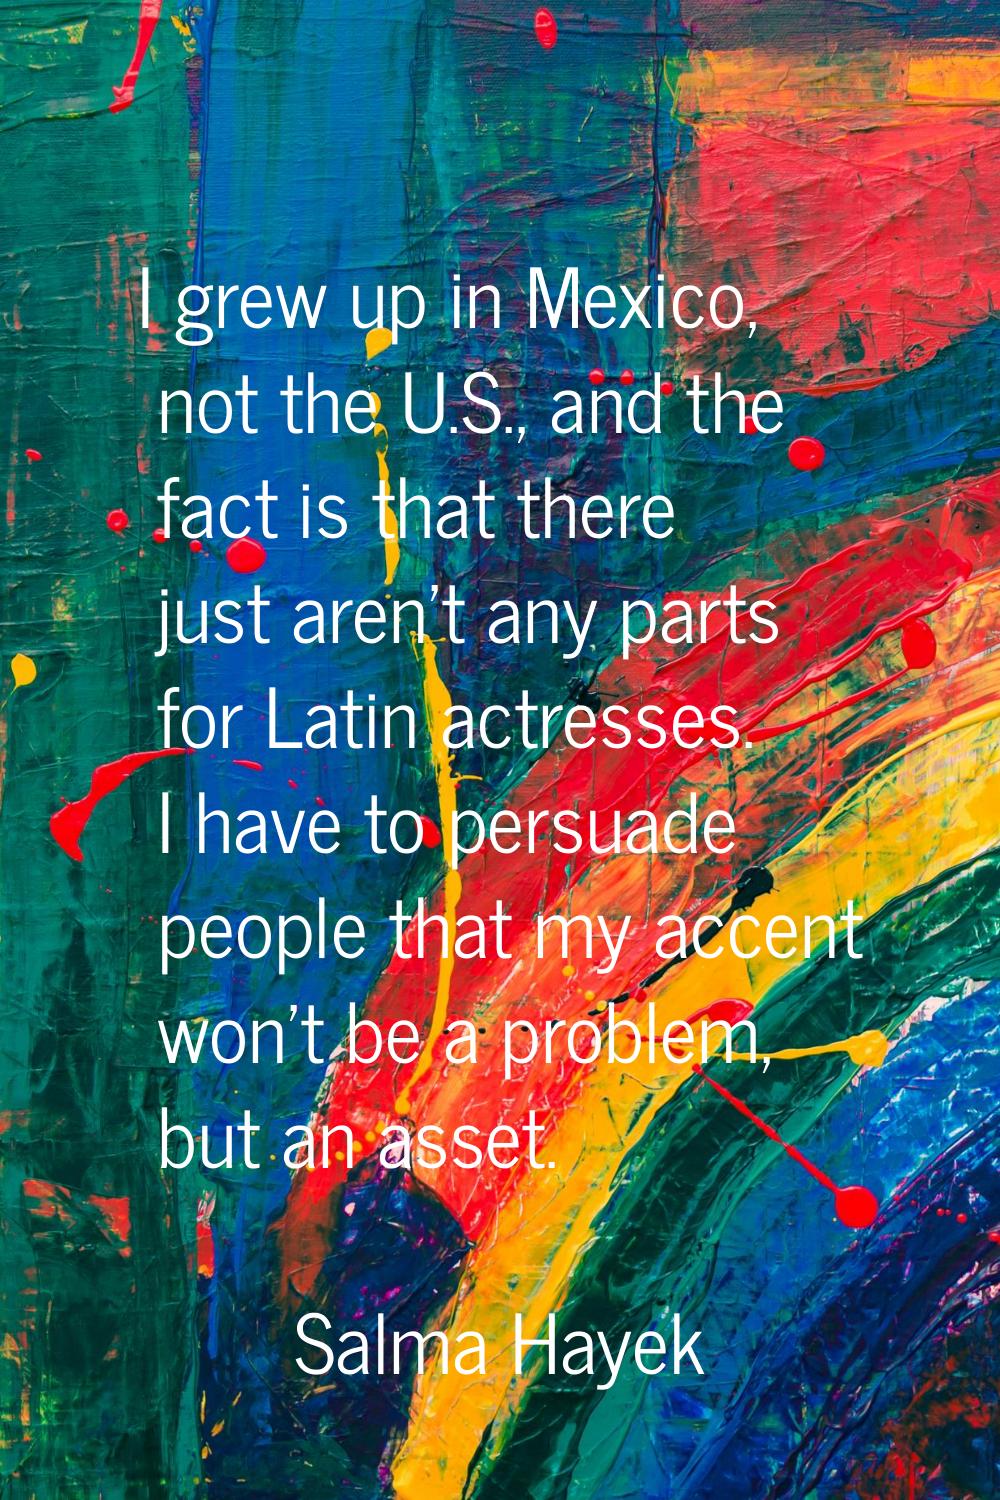 I grew up in Mexico, not the U.S., and the fact is that there just aren't any parts for Latin actre